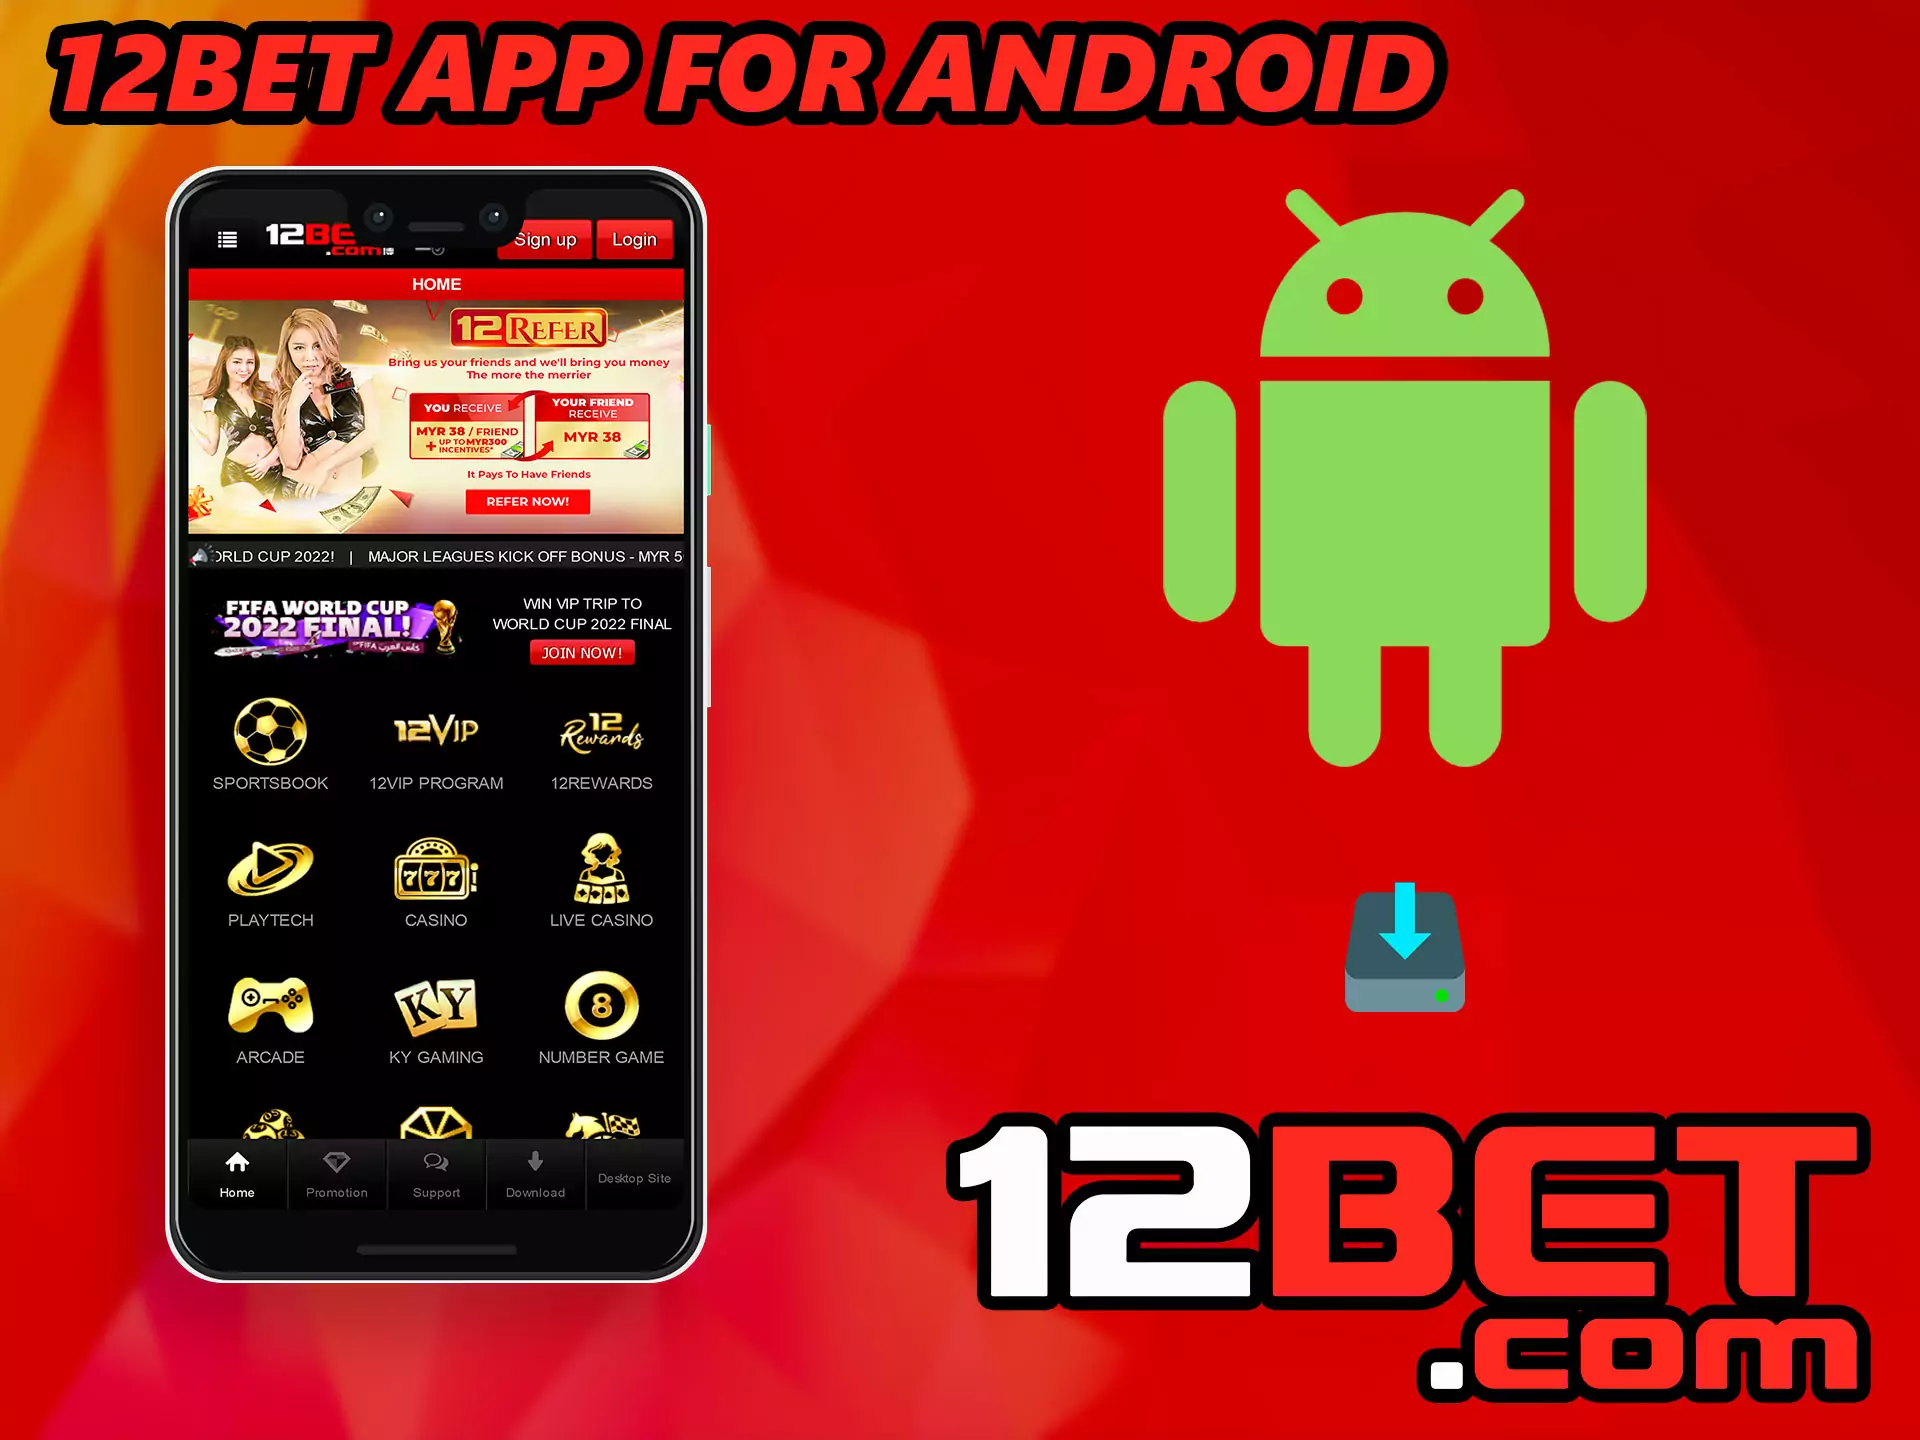 It is very easy to get software for Android, it has optimal system requirements that allow you to run it on almost any smartphone.